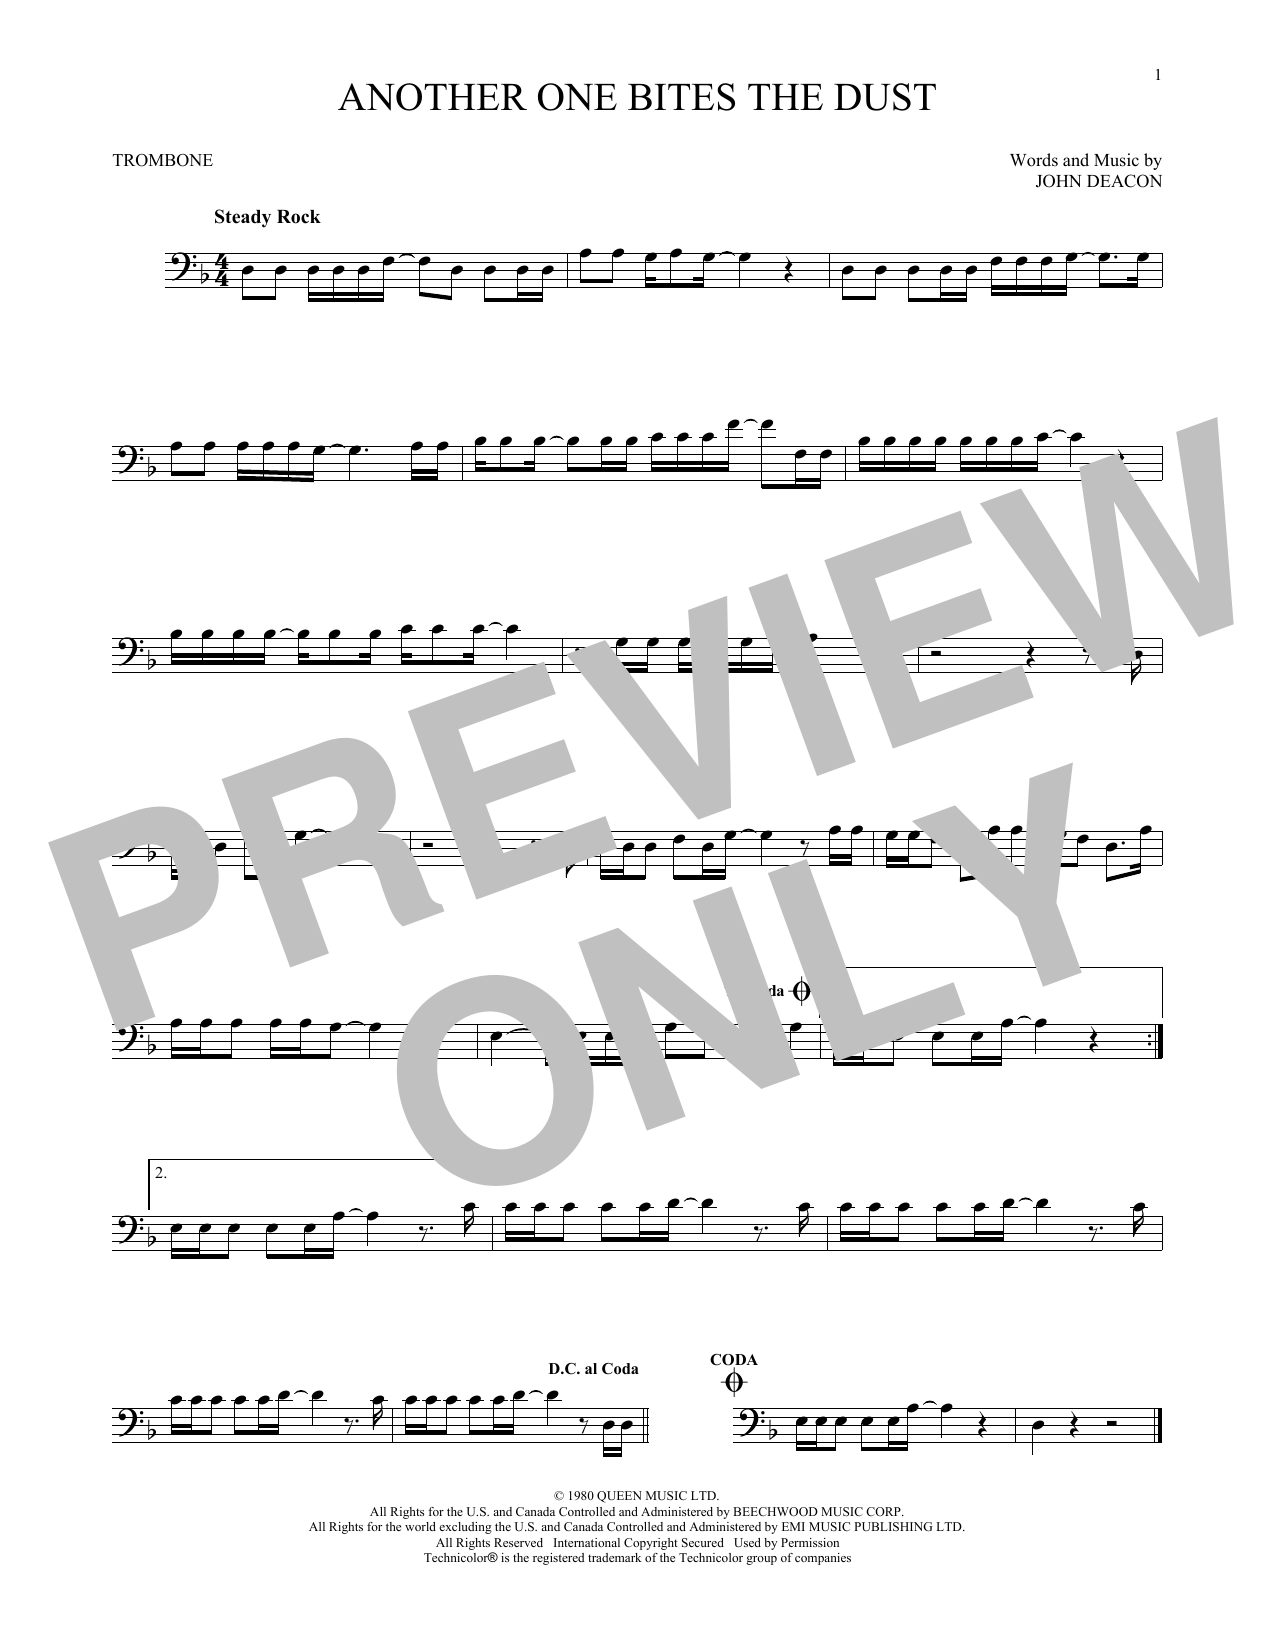 Preview Queen Another One Bites The Dust Rock sheet music, notes and chords...